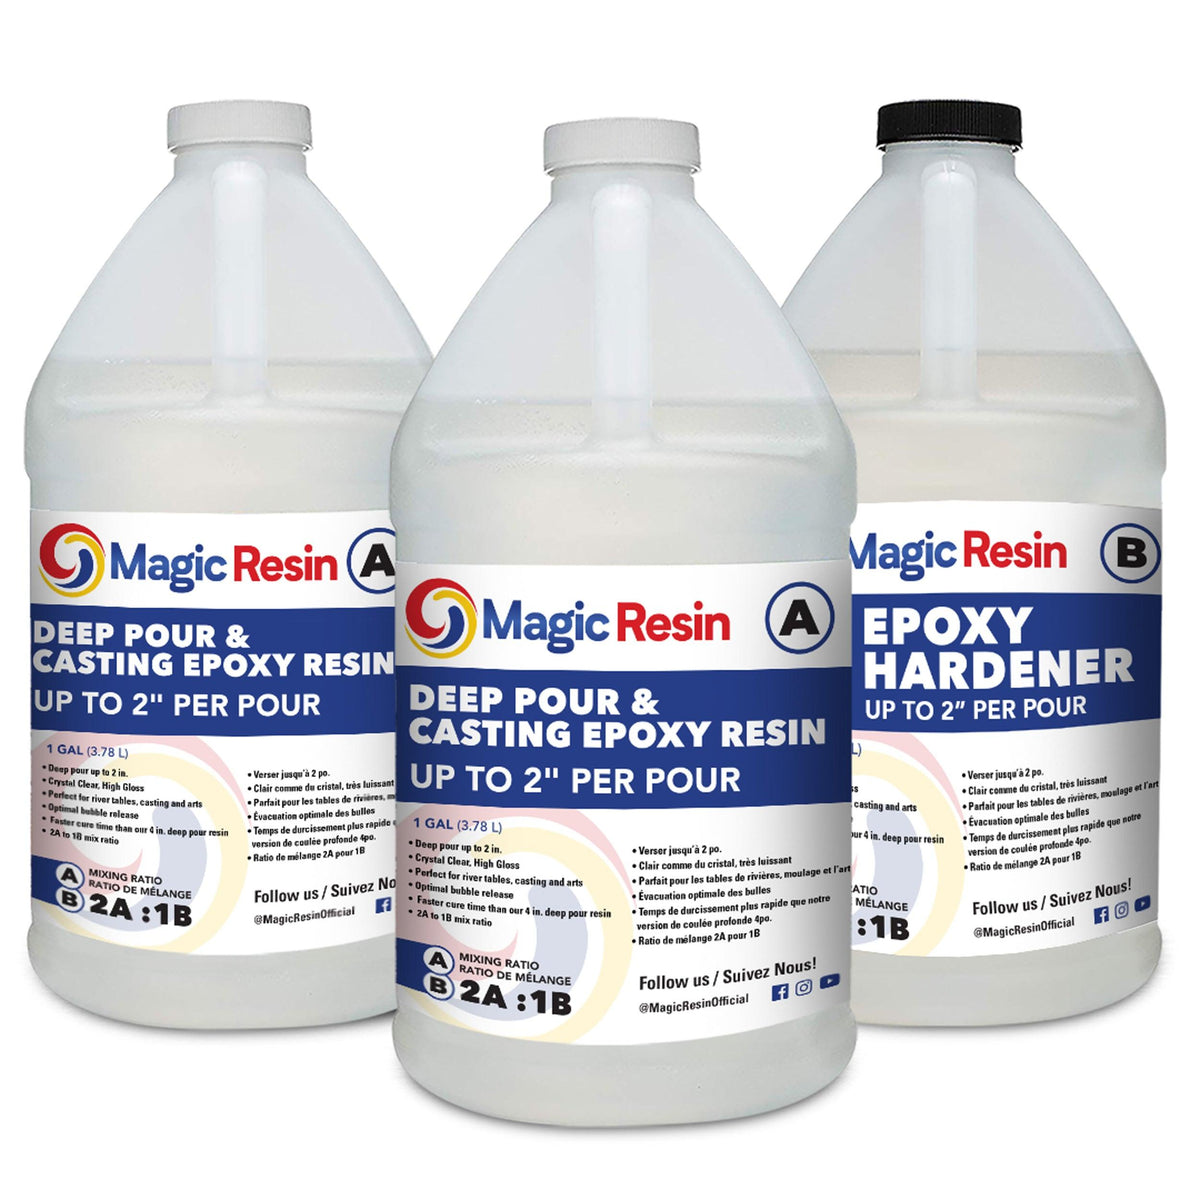 UpStart Epoxy 2 Deep Pour Epoxy Resin Kit DIY - Made in USA - 2 Part Formulation - Perfect Casting Resin for River Table, Countertop, Tabletop, Art